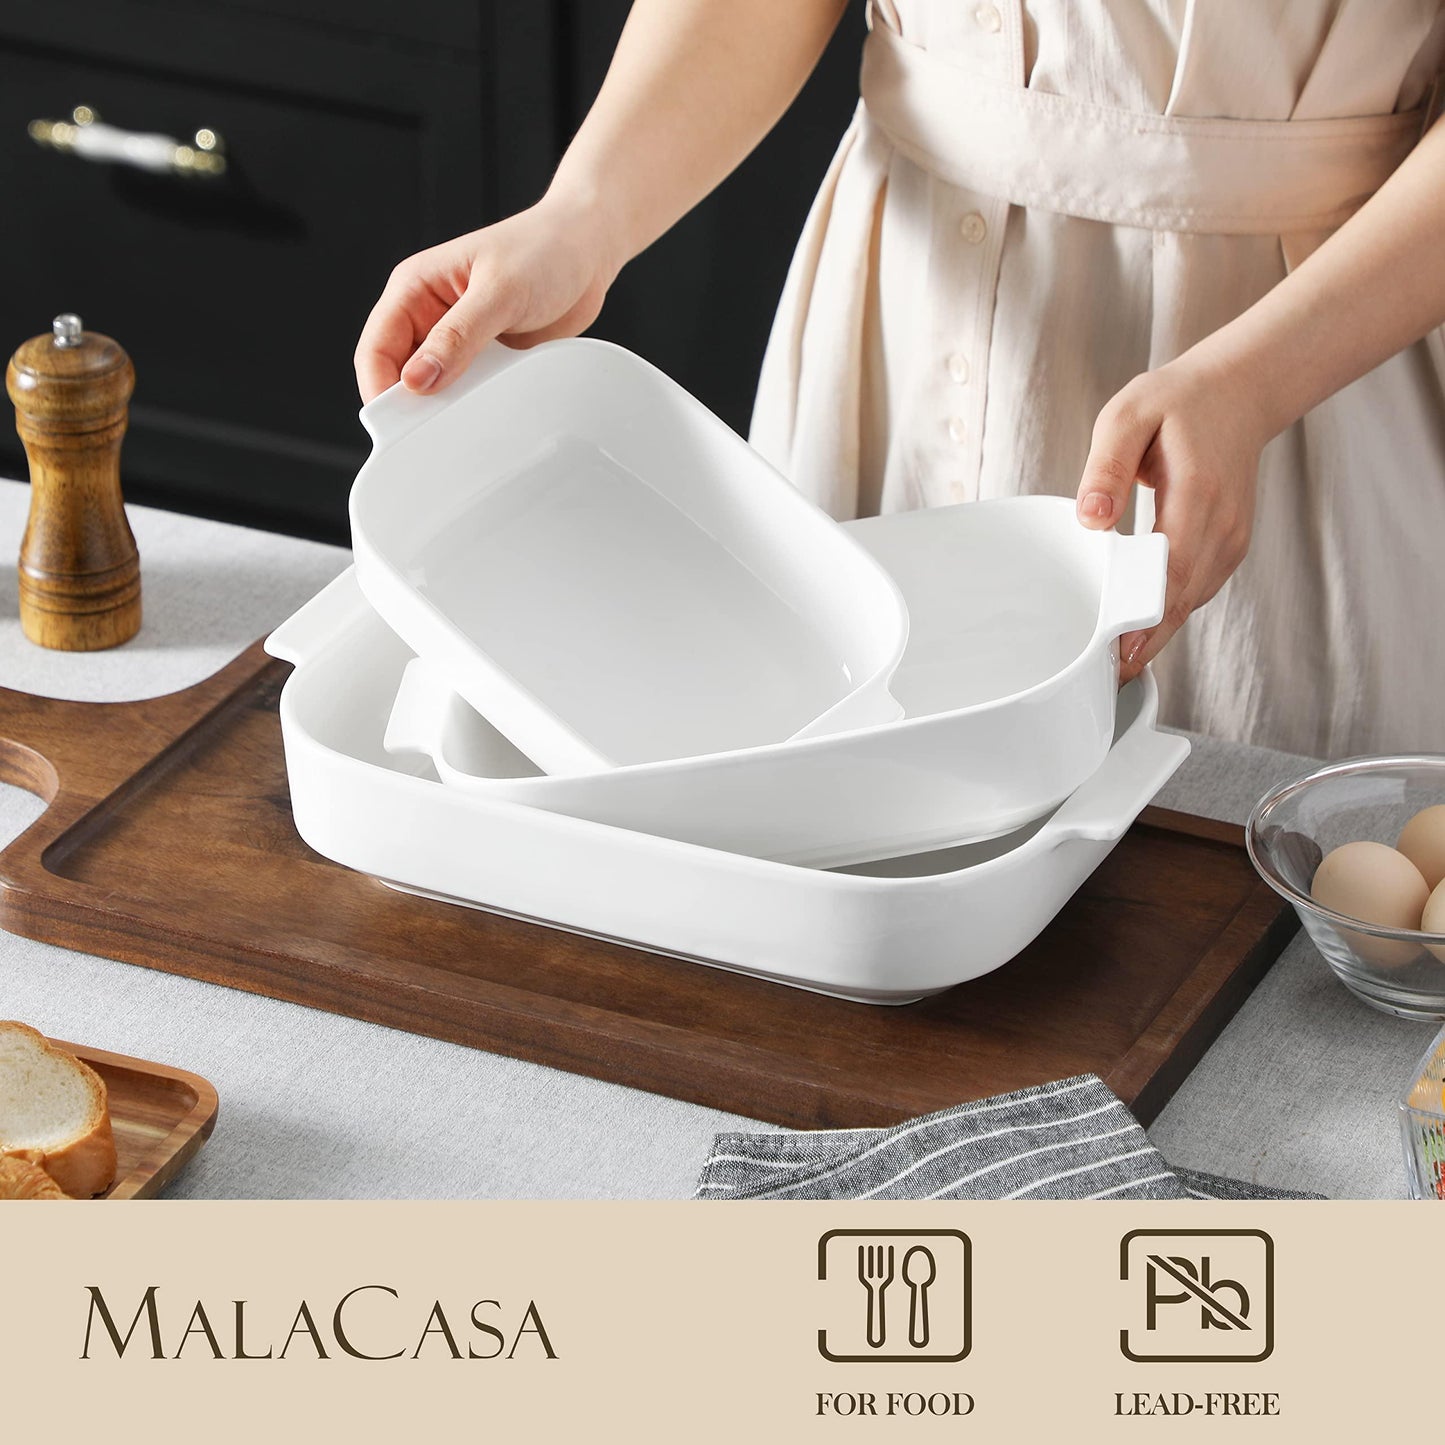 MALACASA Casserole Dishes for Oven, Ceramic Baking Dishes Set of 3, White Casserole Dish Set Lasagna Pan Deep, Baking Dish for Casserole, Bakeware Set with Handles (13.8''/11.7''/9.4''), Series BAKE - CookCave